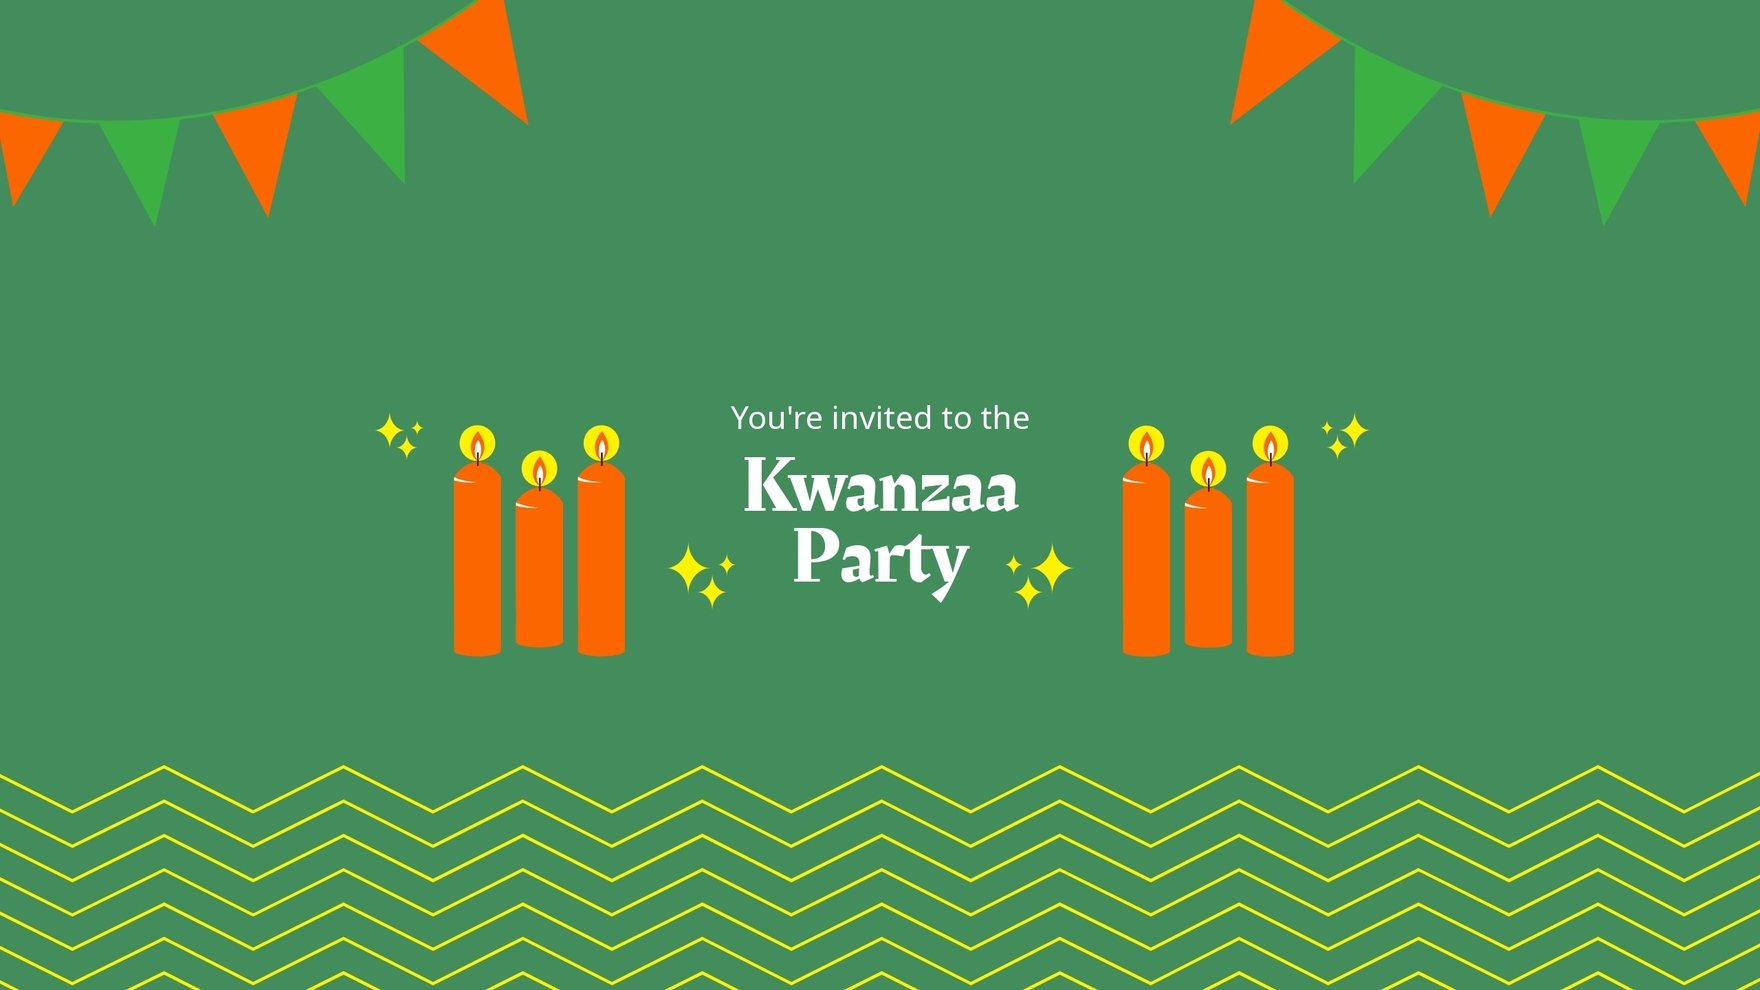 Kwanzaa Party Youtube Banner Template